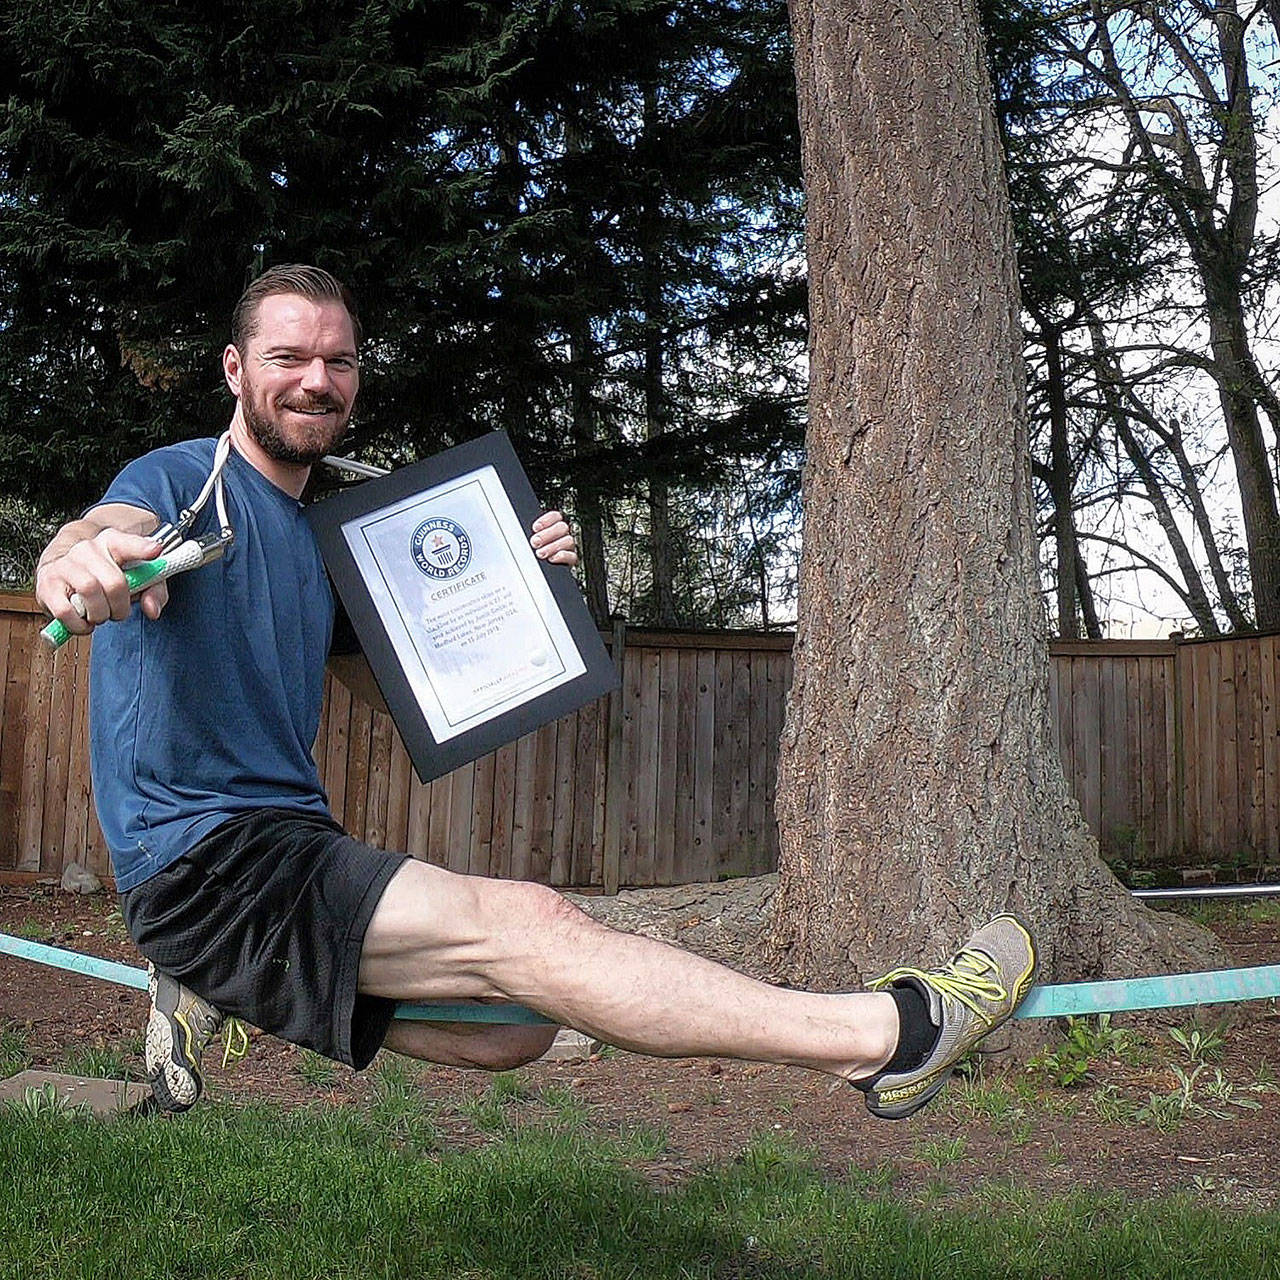 Maple Valley’s Justin Gielski holds his Guinness World Record certificate for doing the “most consecutive skips over a rope on a slack line,” a feat he says helped him earn a return appearance on NBC’s “American Ninja Warrior.” COURTESY PHOTO